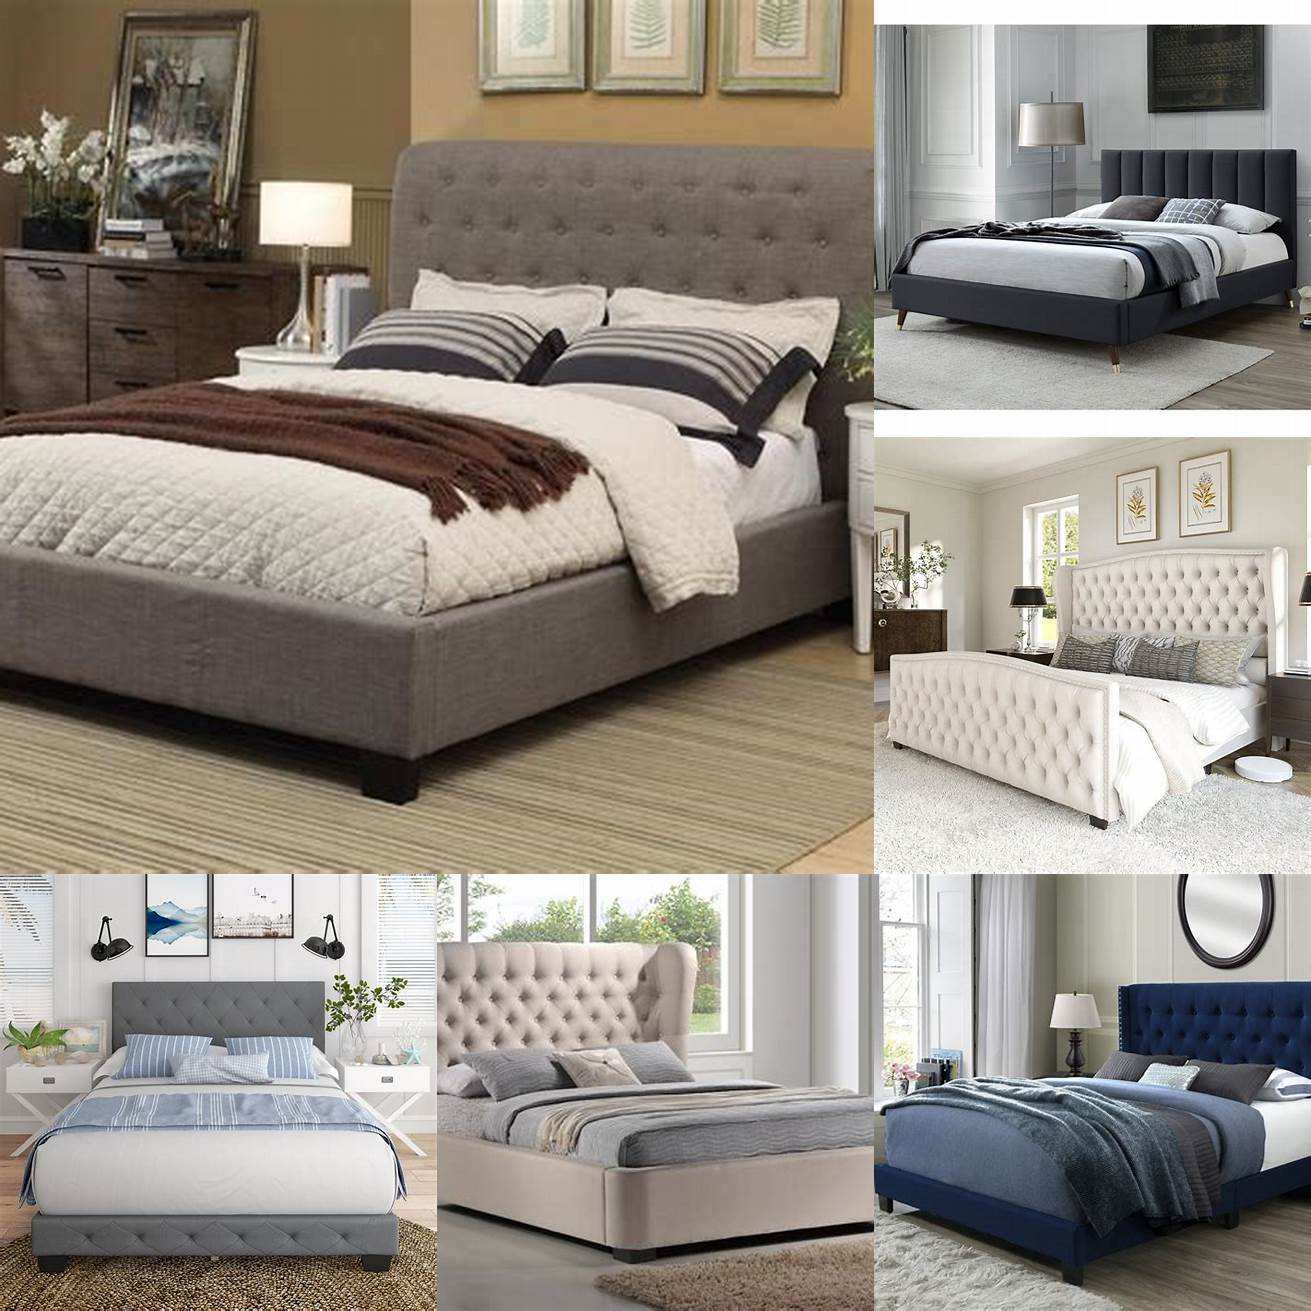 Upholstered platform bed with tufted headboard